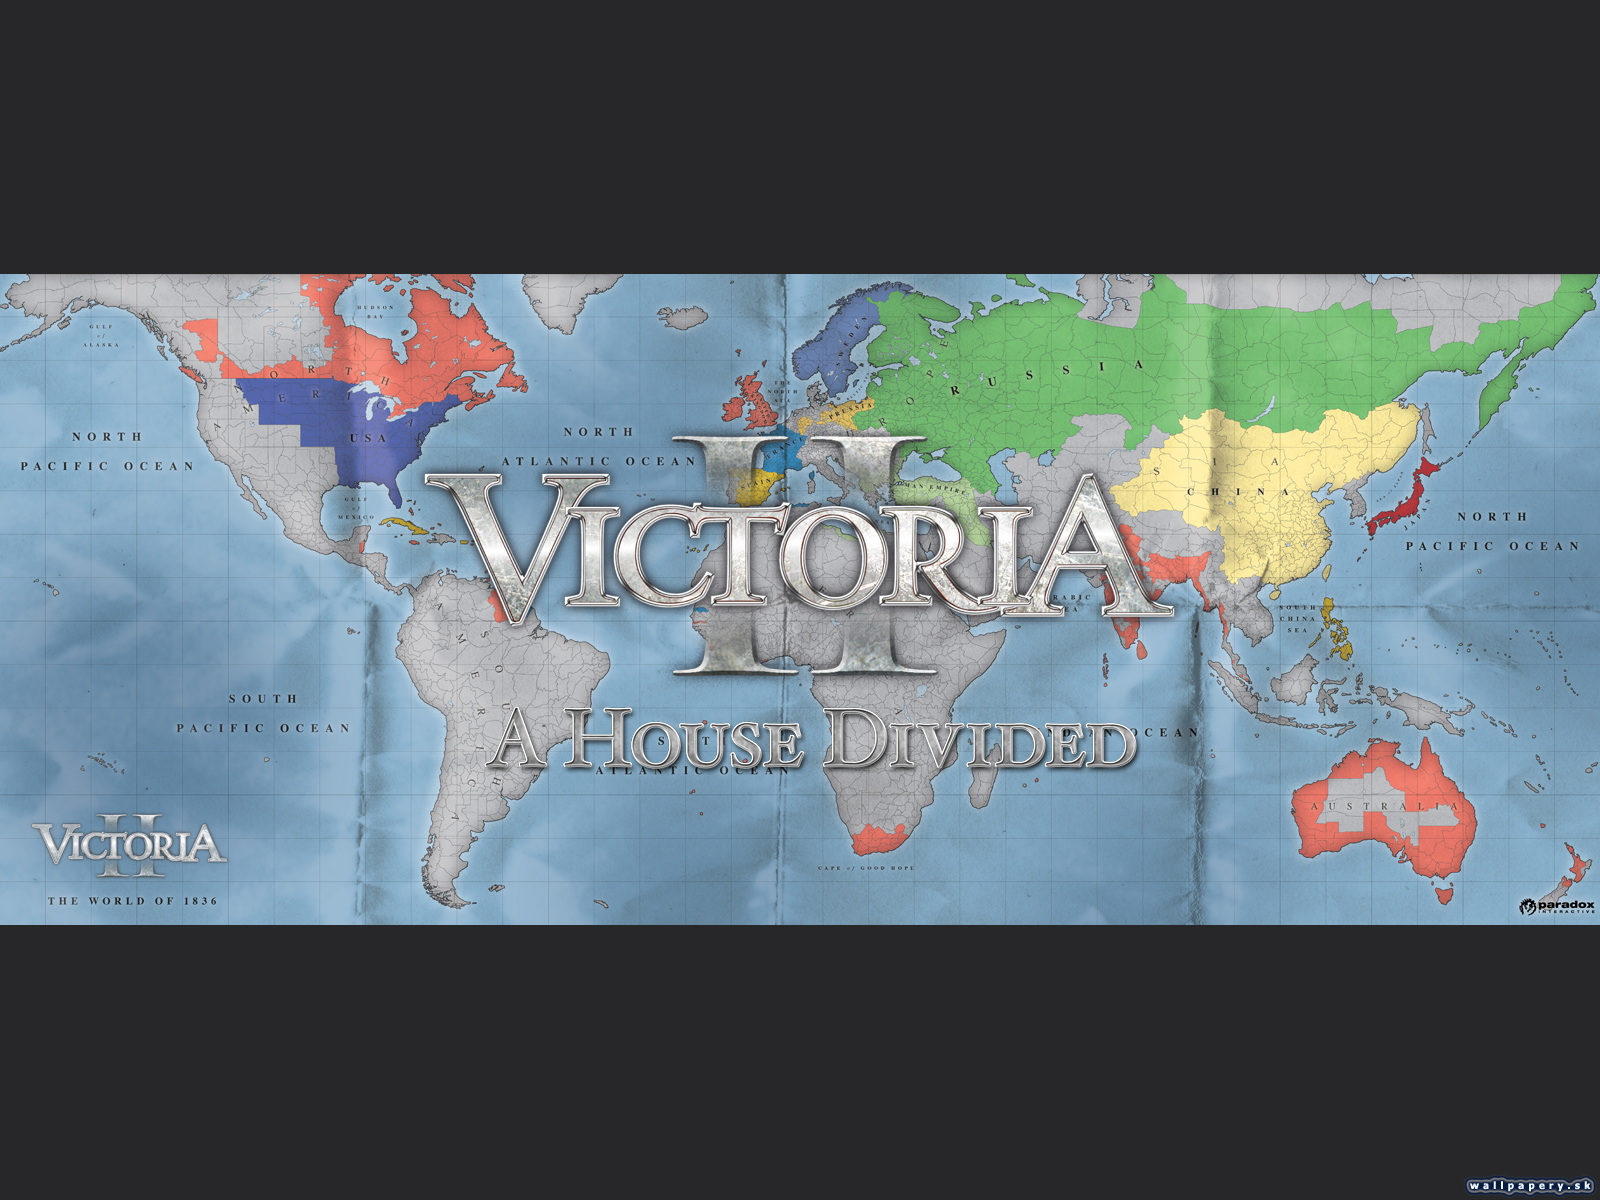 Victoria 2: A House Divided - wallpaper 4